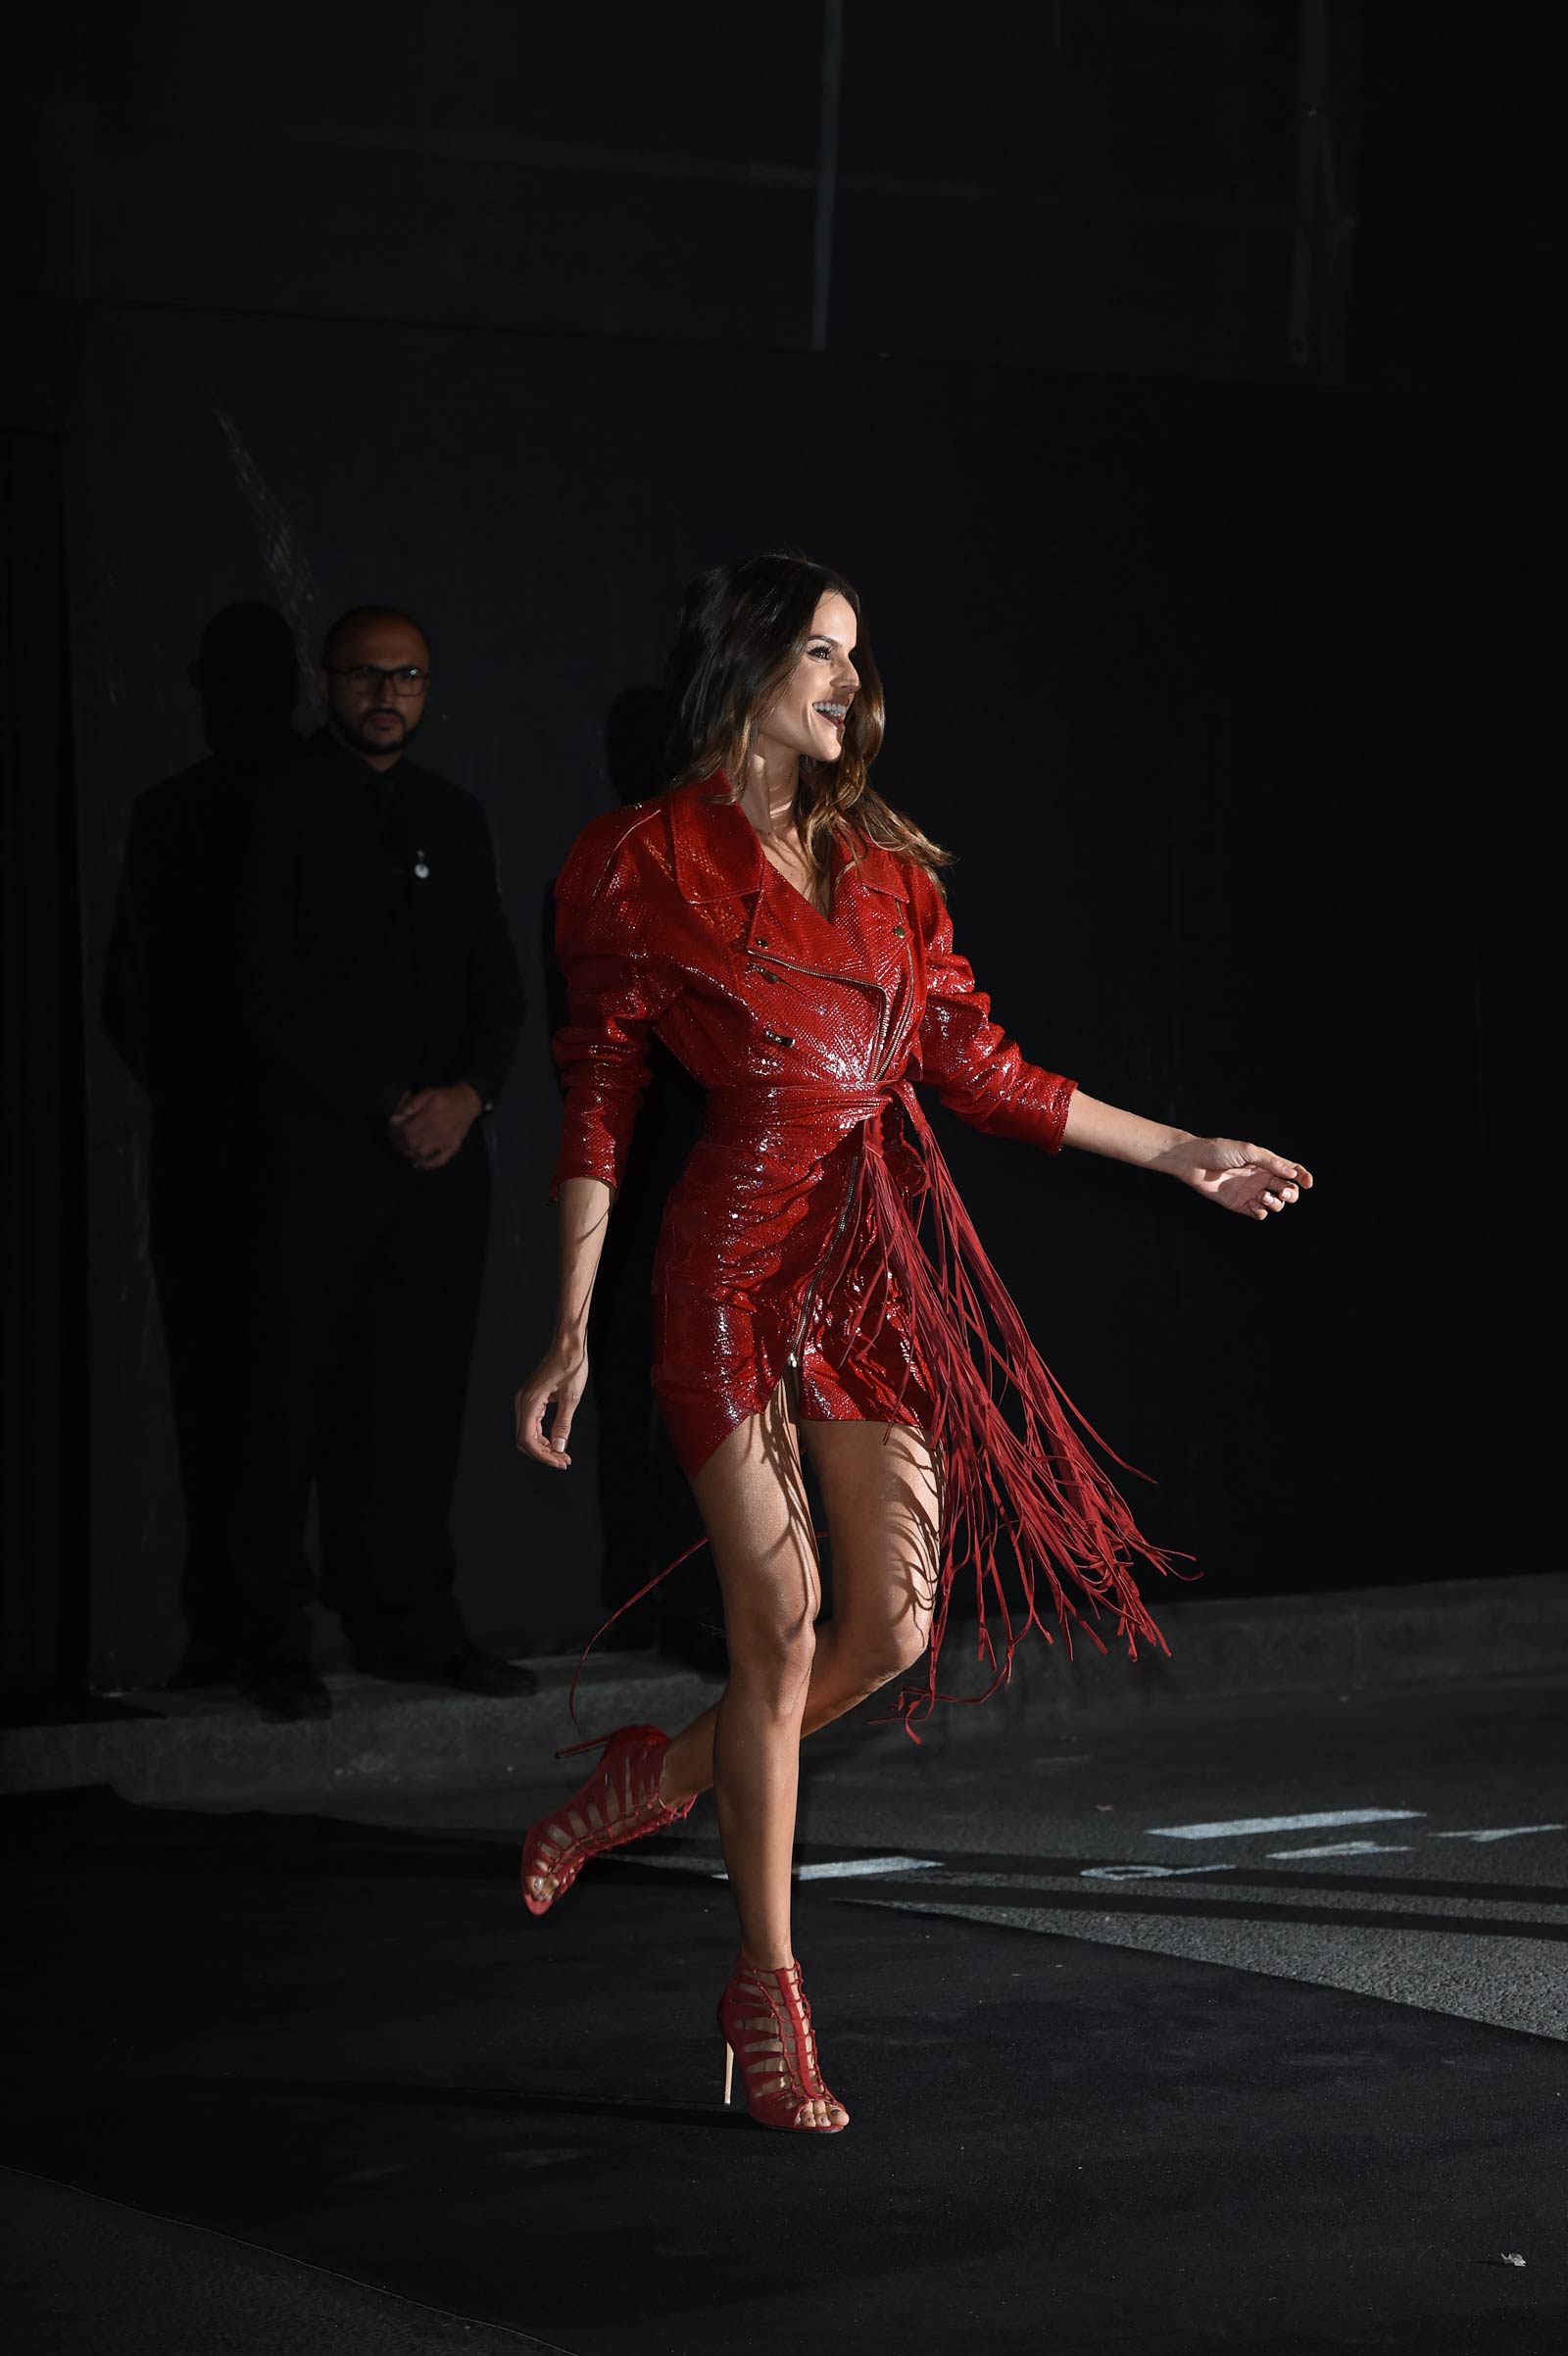 Izabel Goulart attends Vogue 95th anniversary party